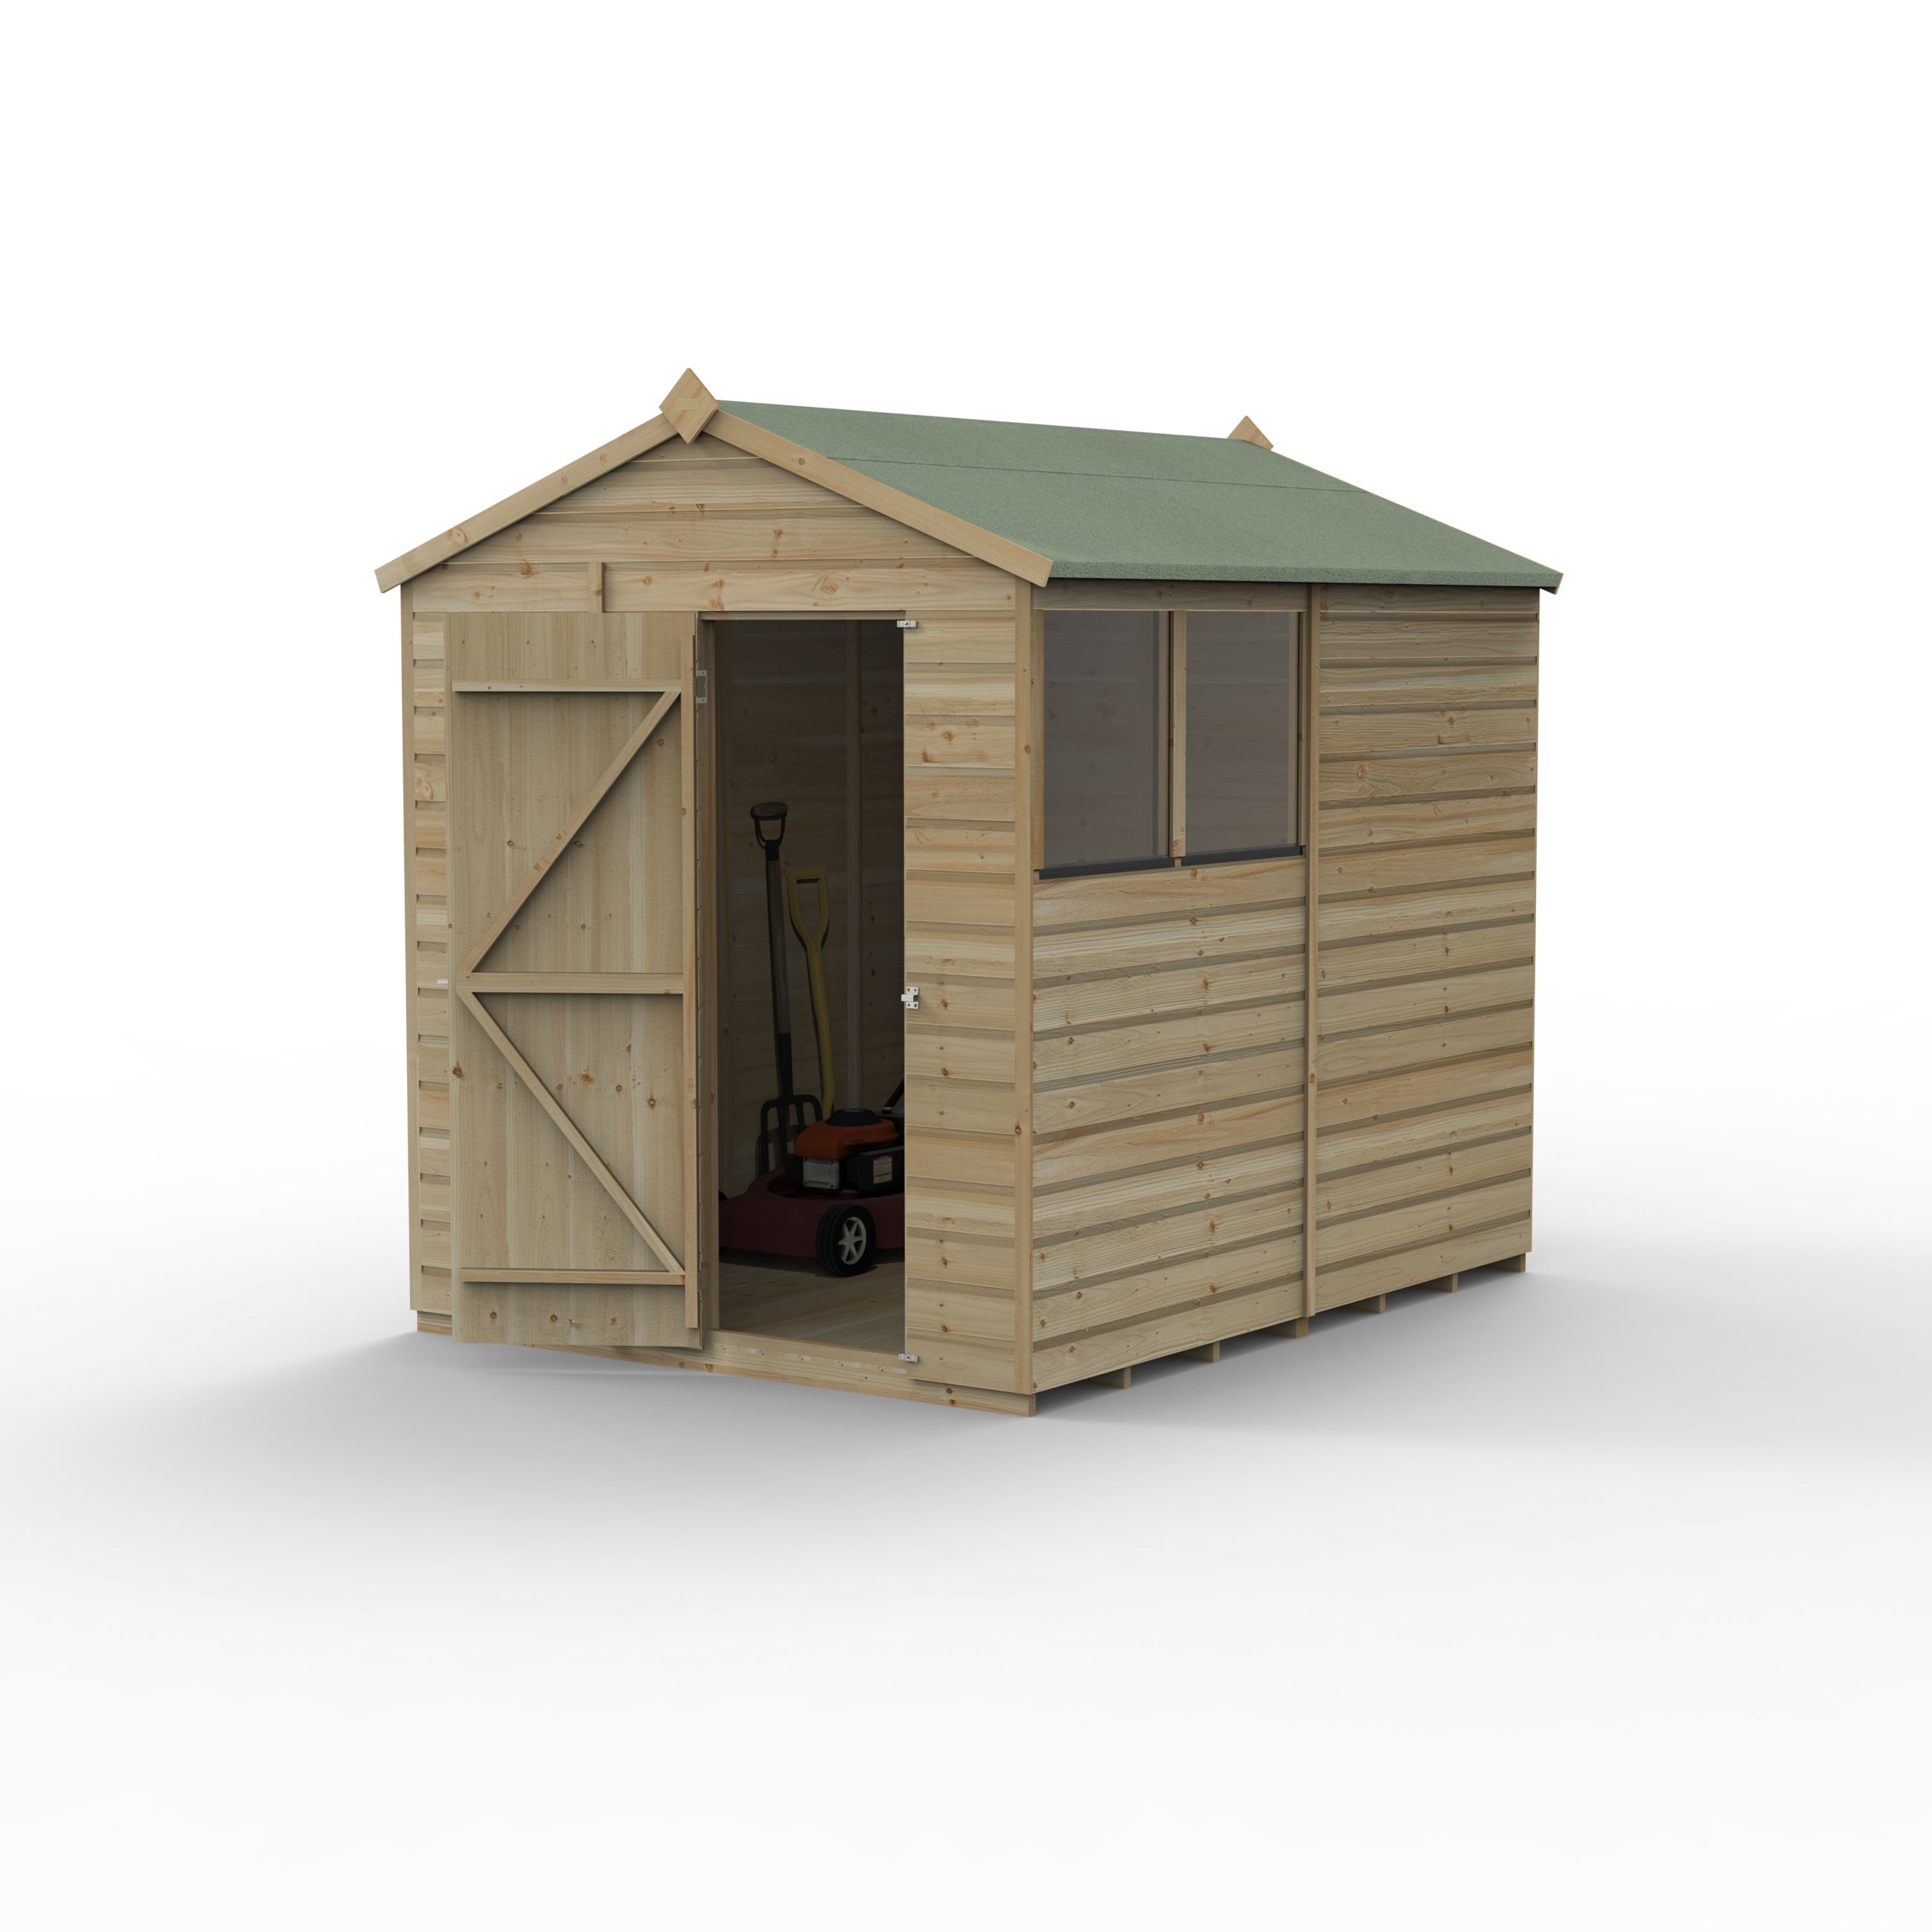 Forest Garden Beckwood 8x6 ft Apex Natural timber Wooden Shed with floor & 2 windows (Base included) - Assembly not required